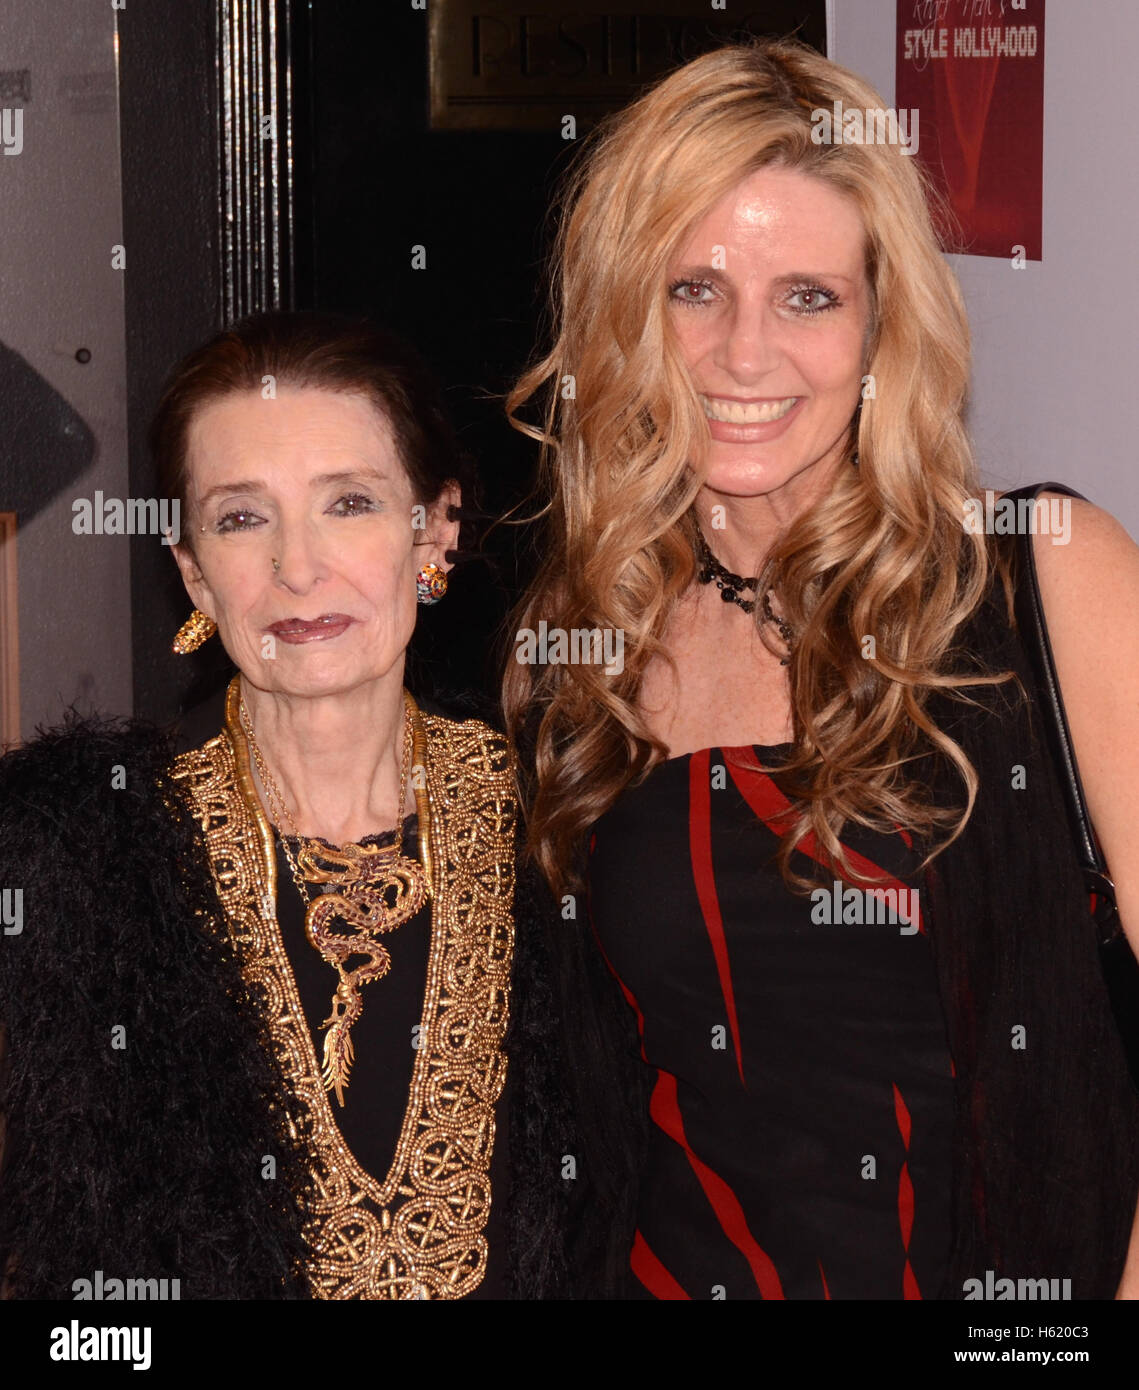 Margaret O'Brien (l) arrives at the 1st Annual Roger Neal Style Hollywood Oscar Viewing Dinner at The Hollywood Museum on February 28, 2016 Stock Photo